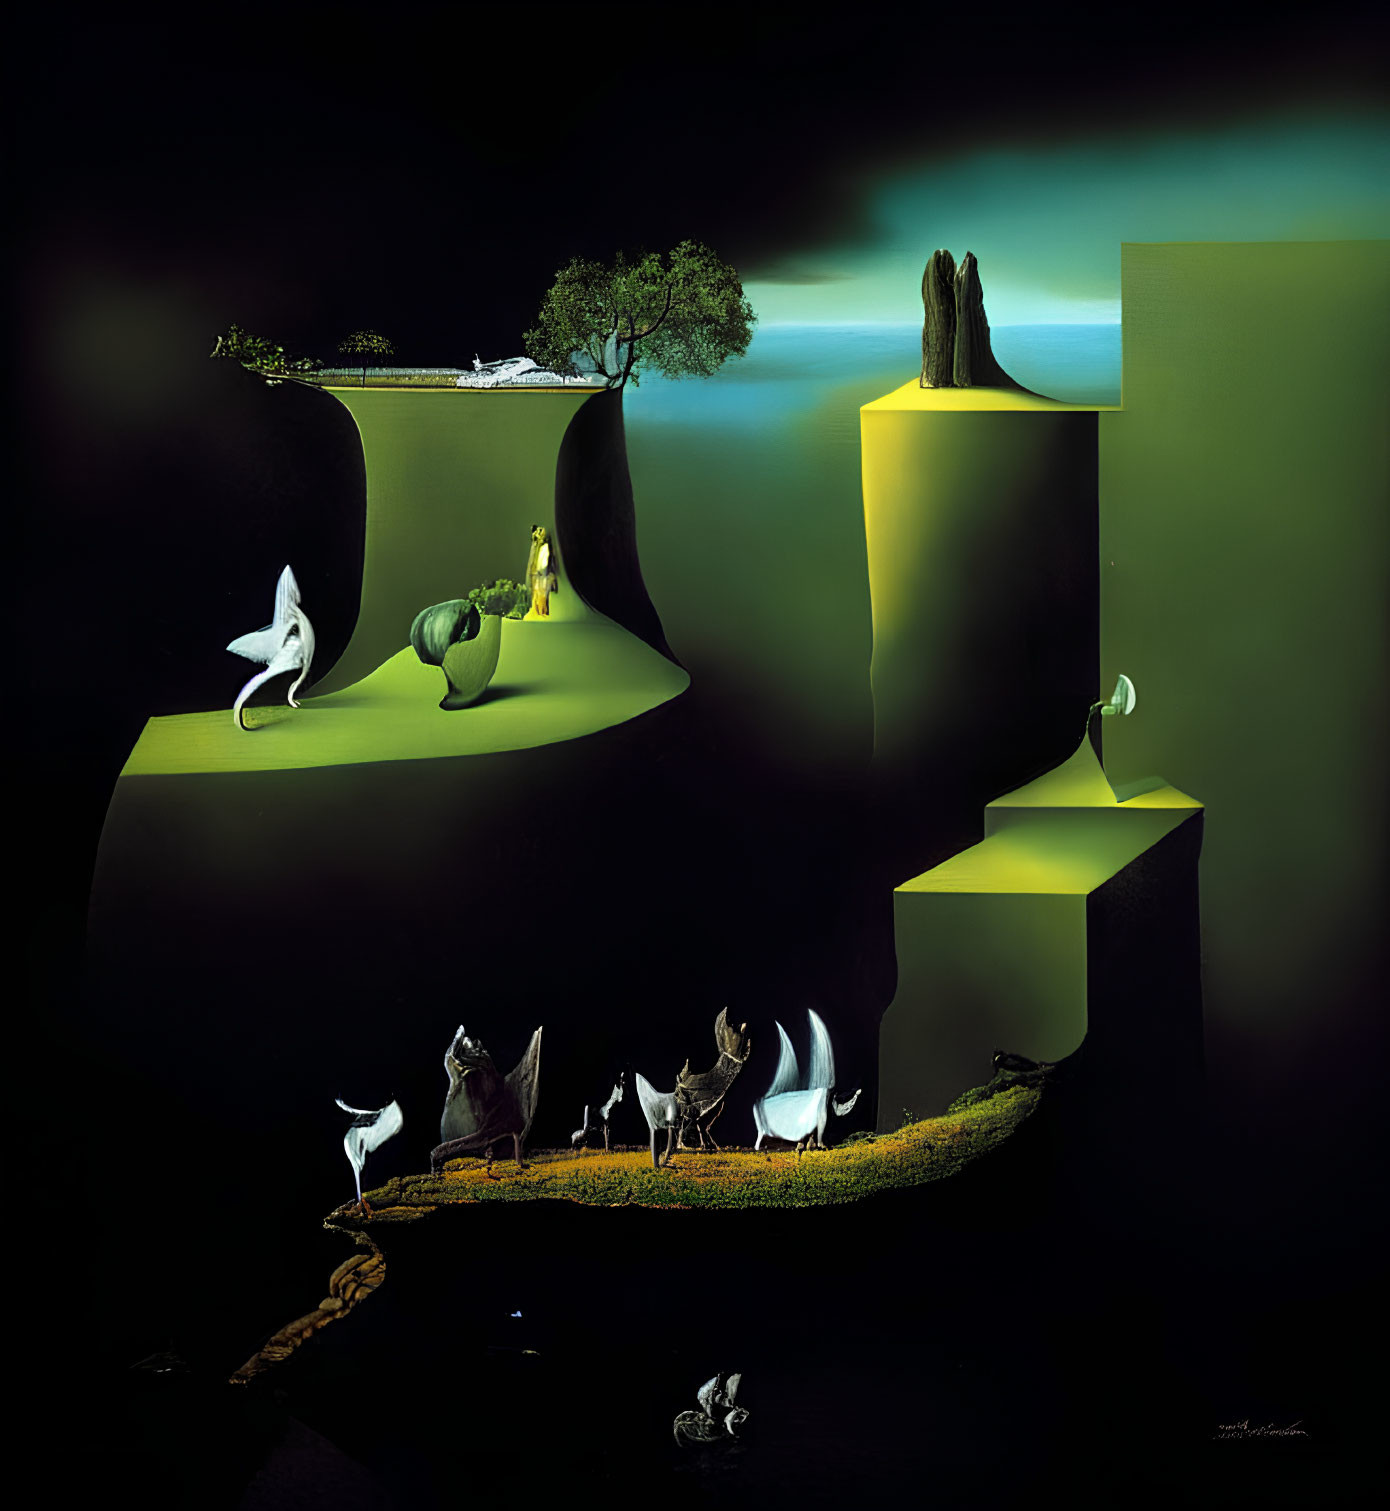 Surrealistic artwork with floating islands, anthropomorphic figures, and enigmatic shapes in a dark